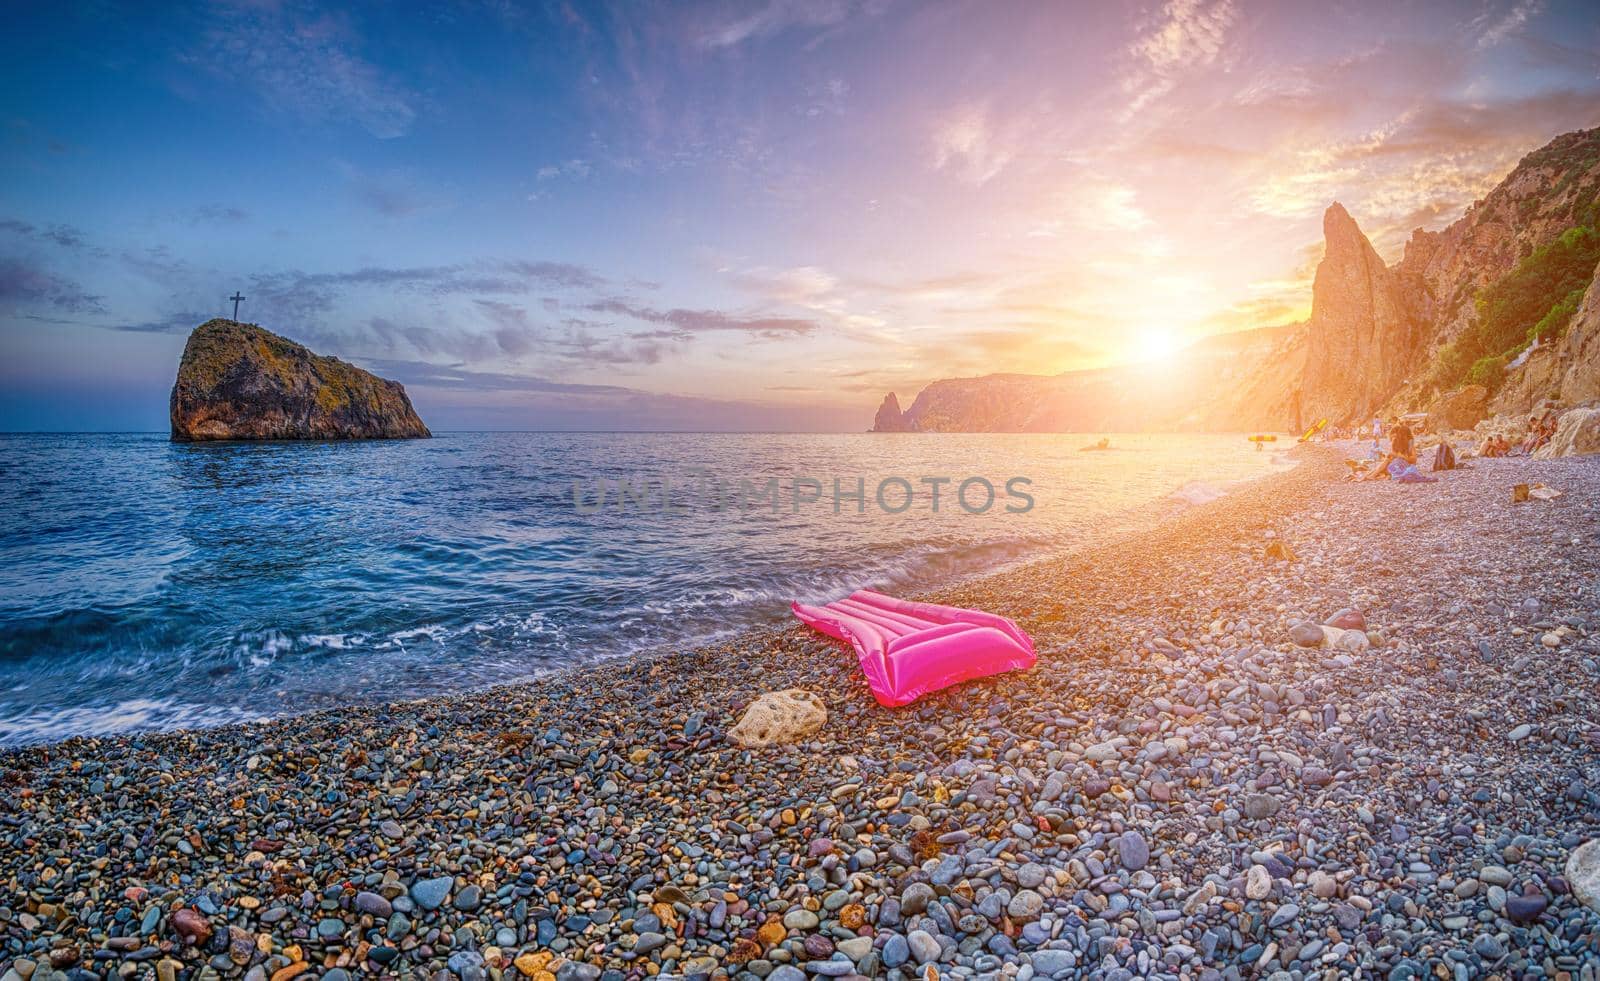 Pink inflatable mattress on the pebbles beach at sunset. Rocky seaside view with single inflatable mattress. Summer vacation background. Copy space. Travel, relax or loneliness concept